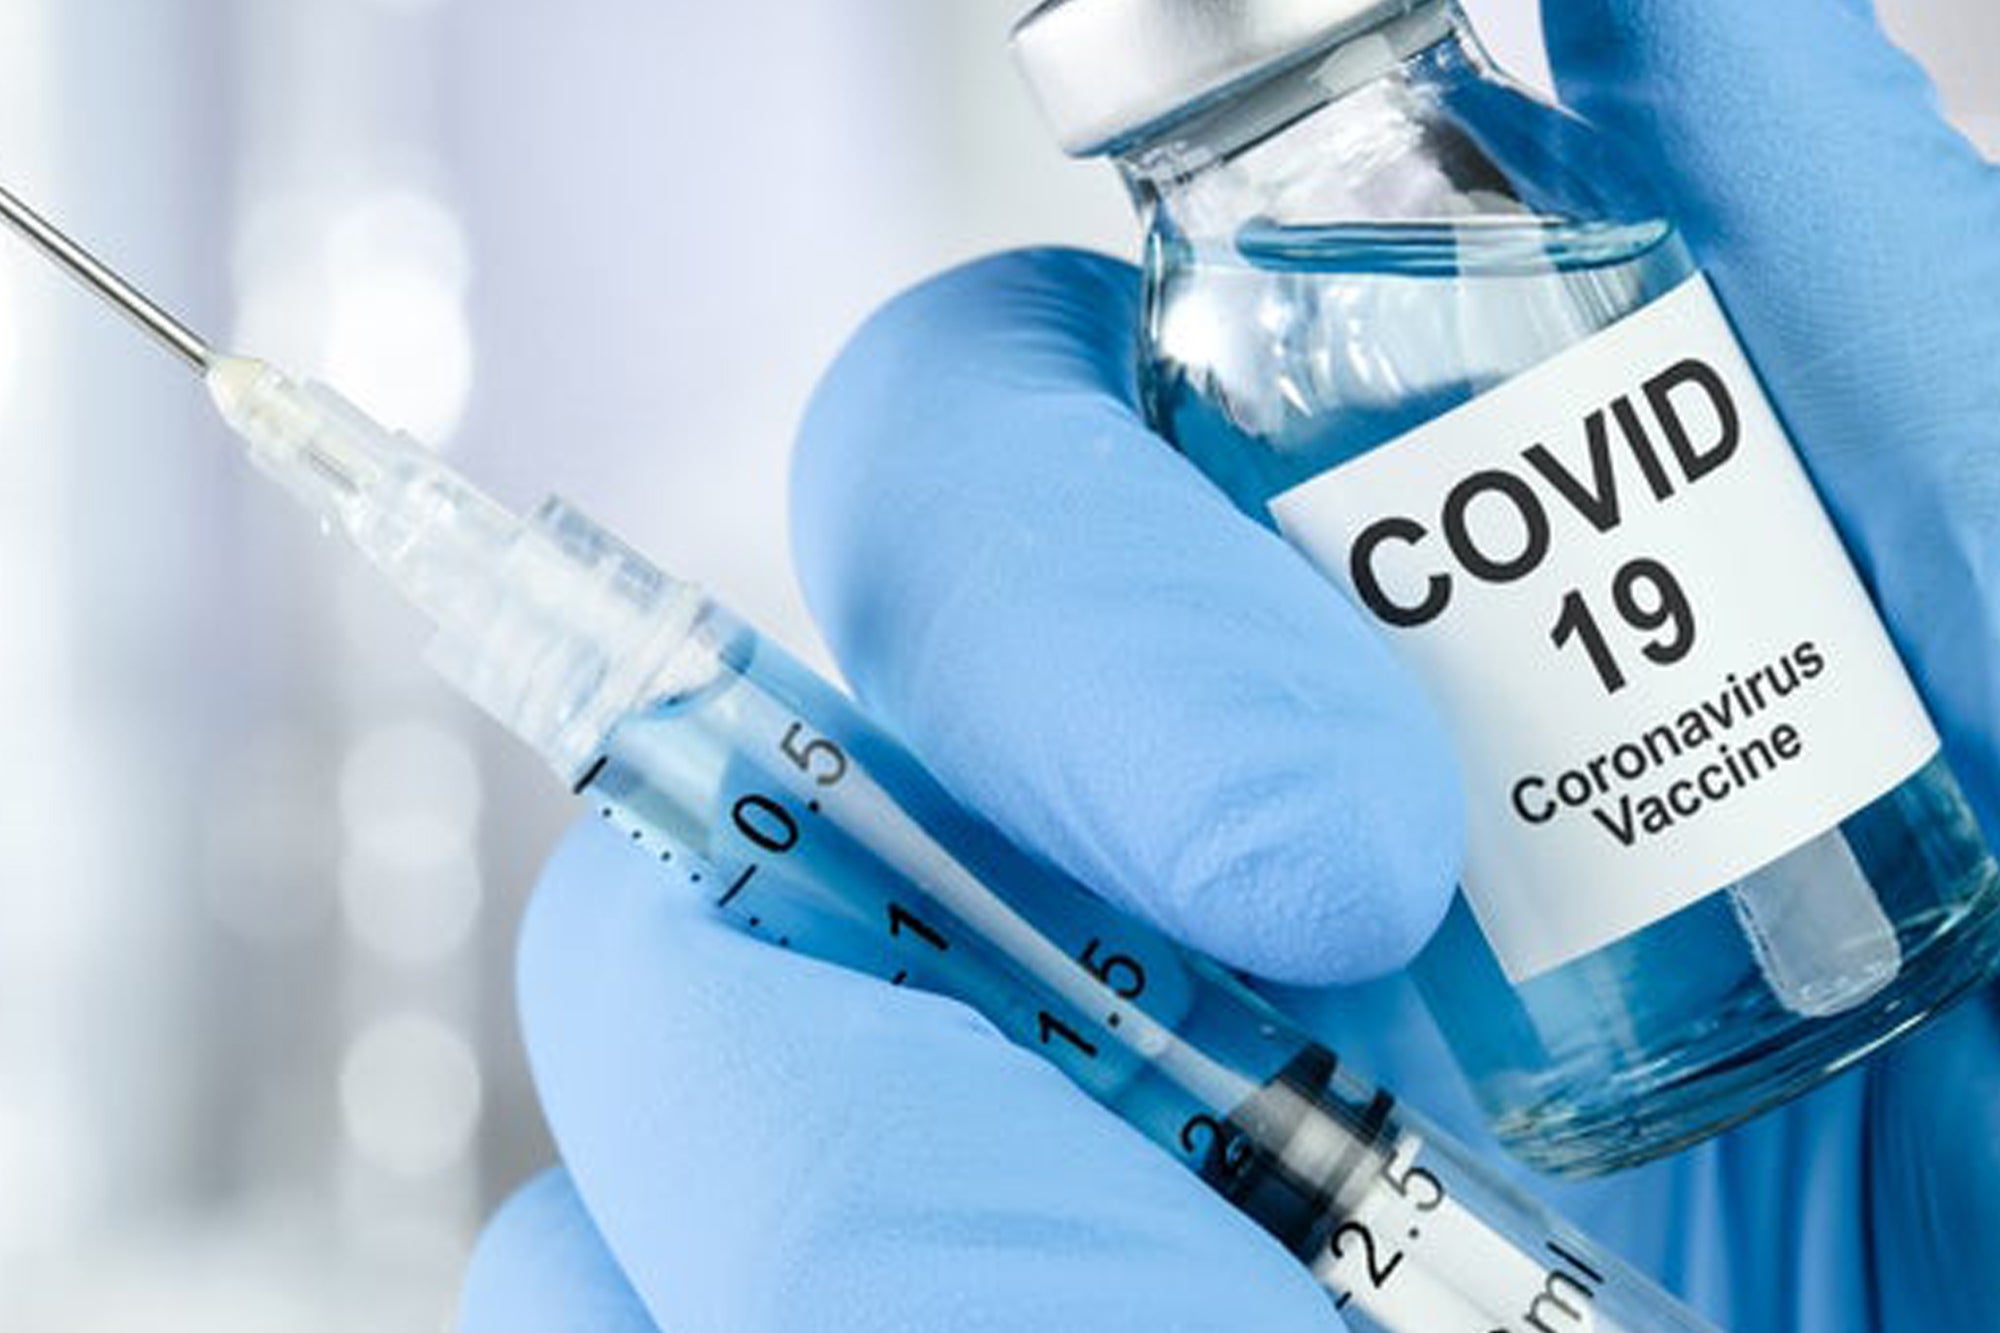 Index Baja California is interested in acquiring the vaccine against COVID-19